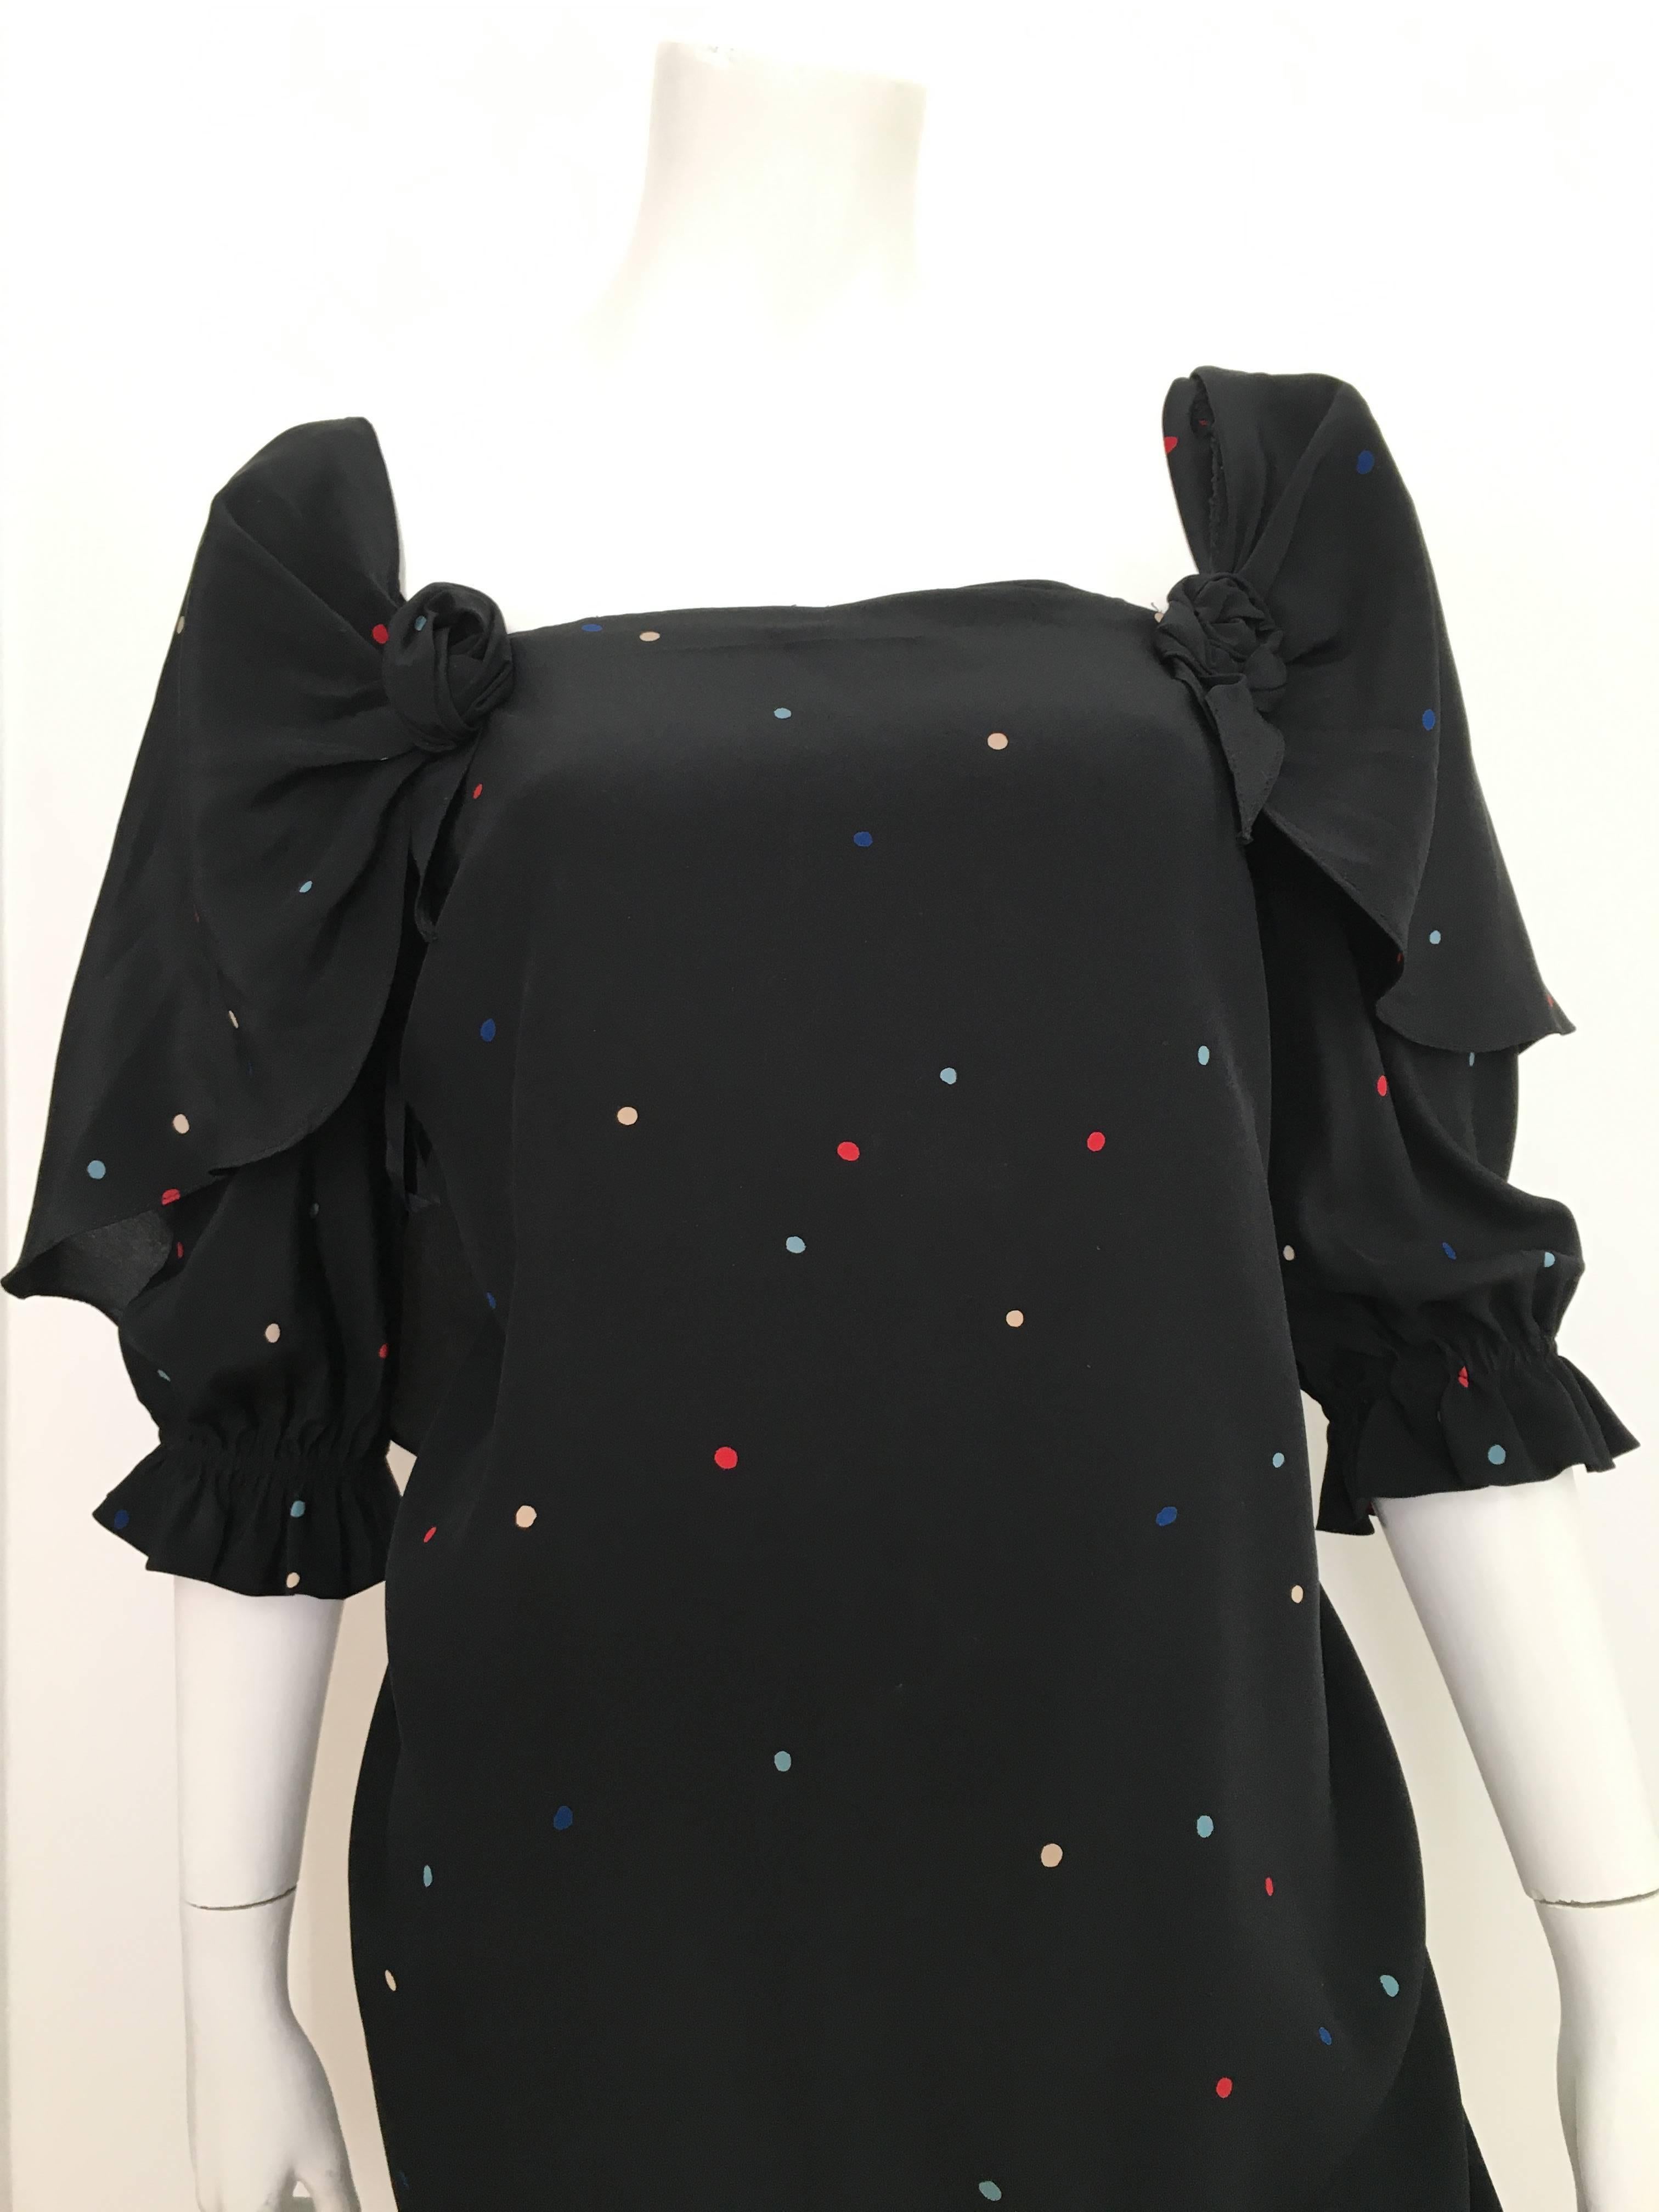 Halston 1970s black silk polka dot dress is a size 6 /8.  Ladies please use your measuring tape so that you can properly measure your bust, waist & hips to make certain this will fit your lovely body the way Halston wanted it to. This dress is